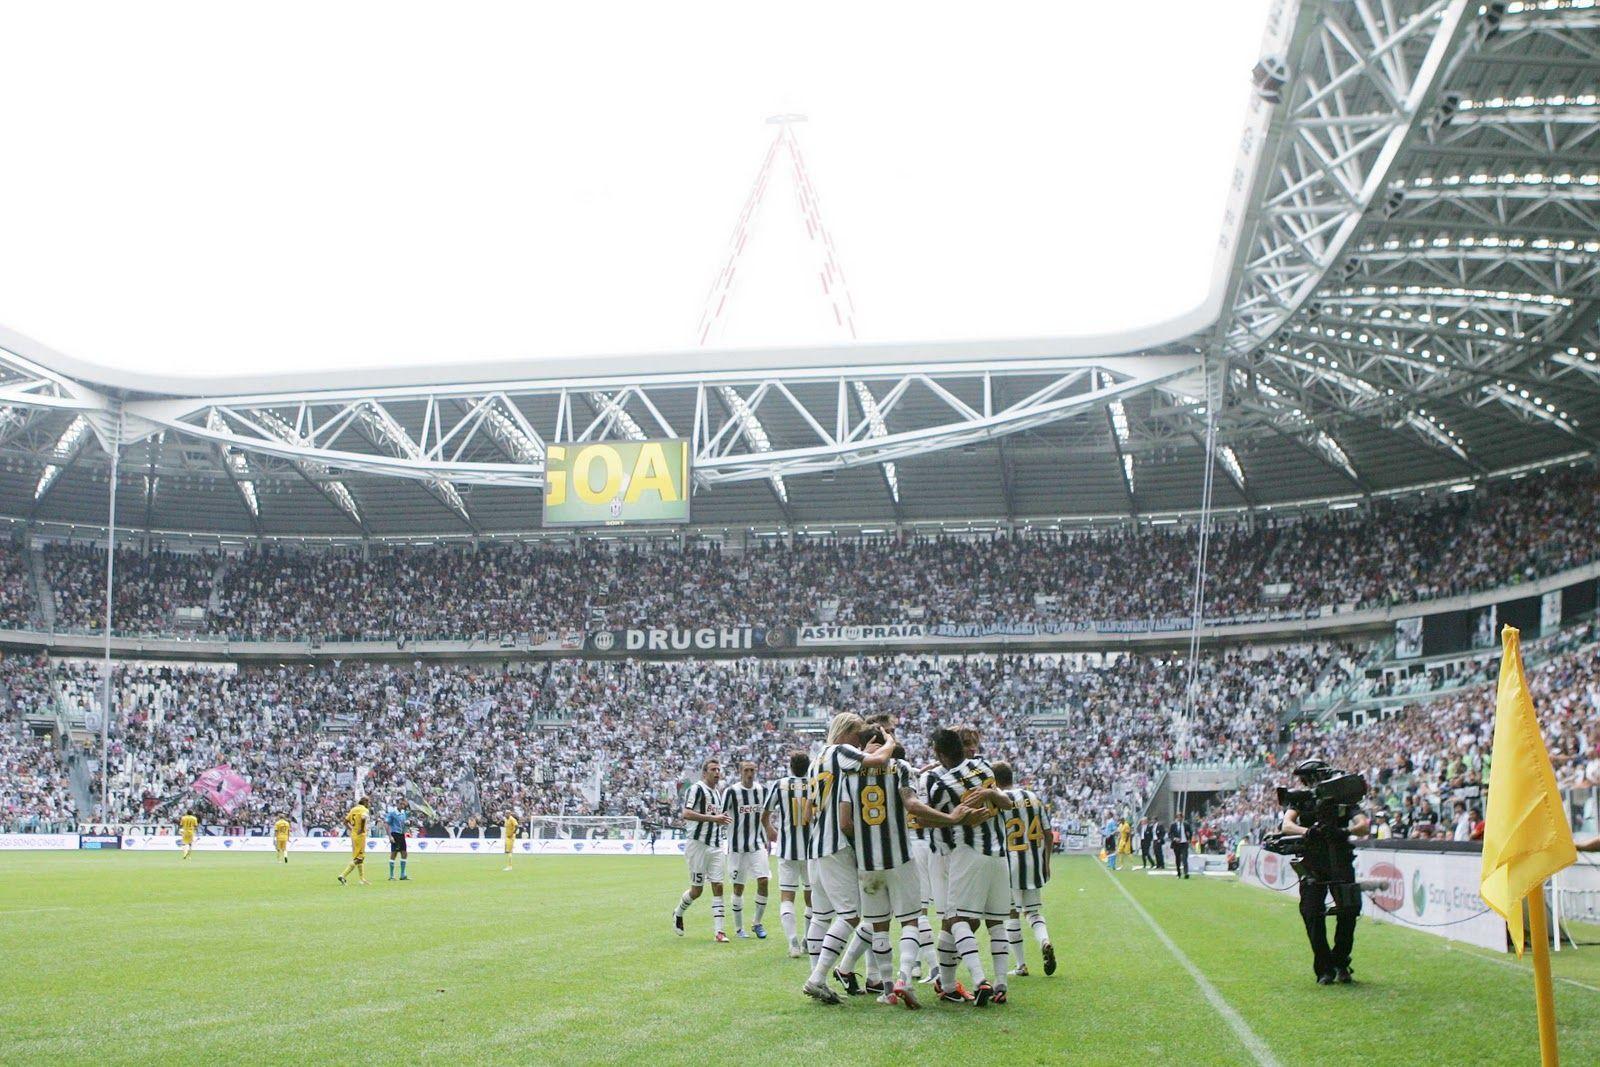 Juventus Stadium, Turin, Italy. home of the current champions